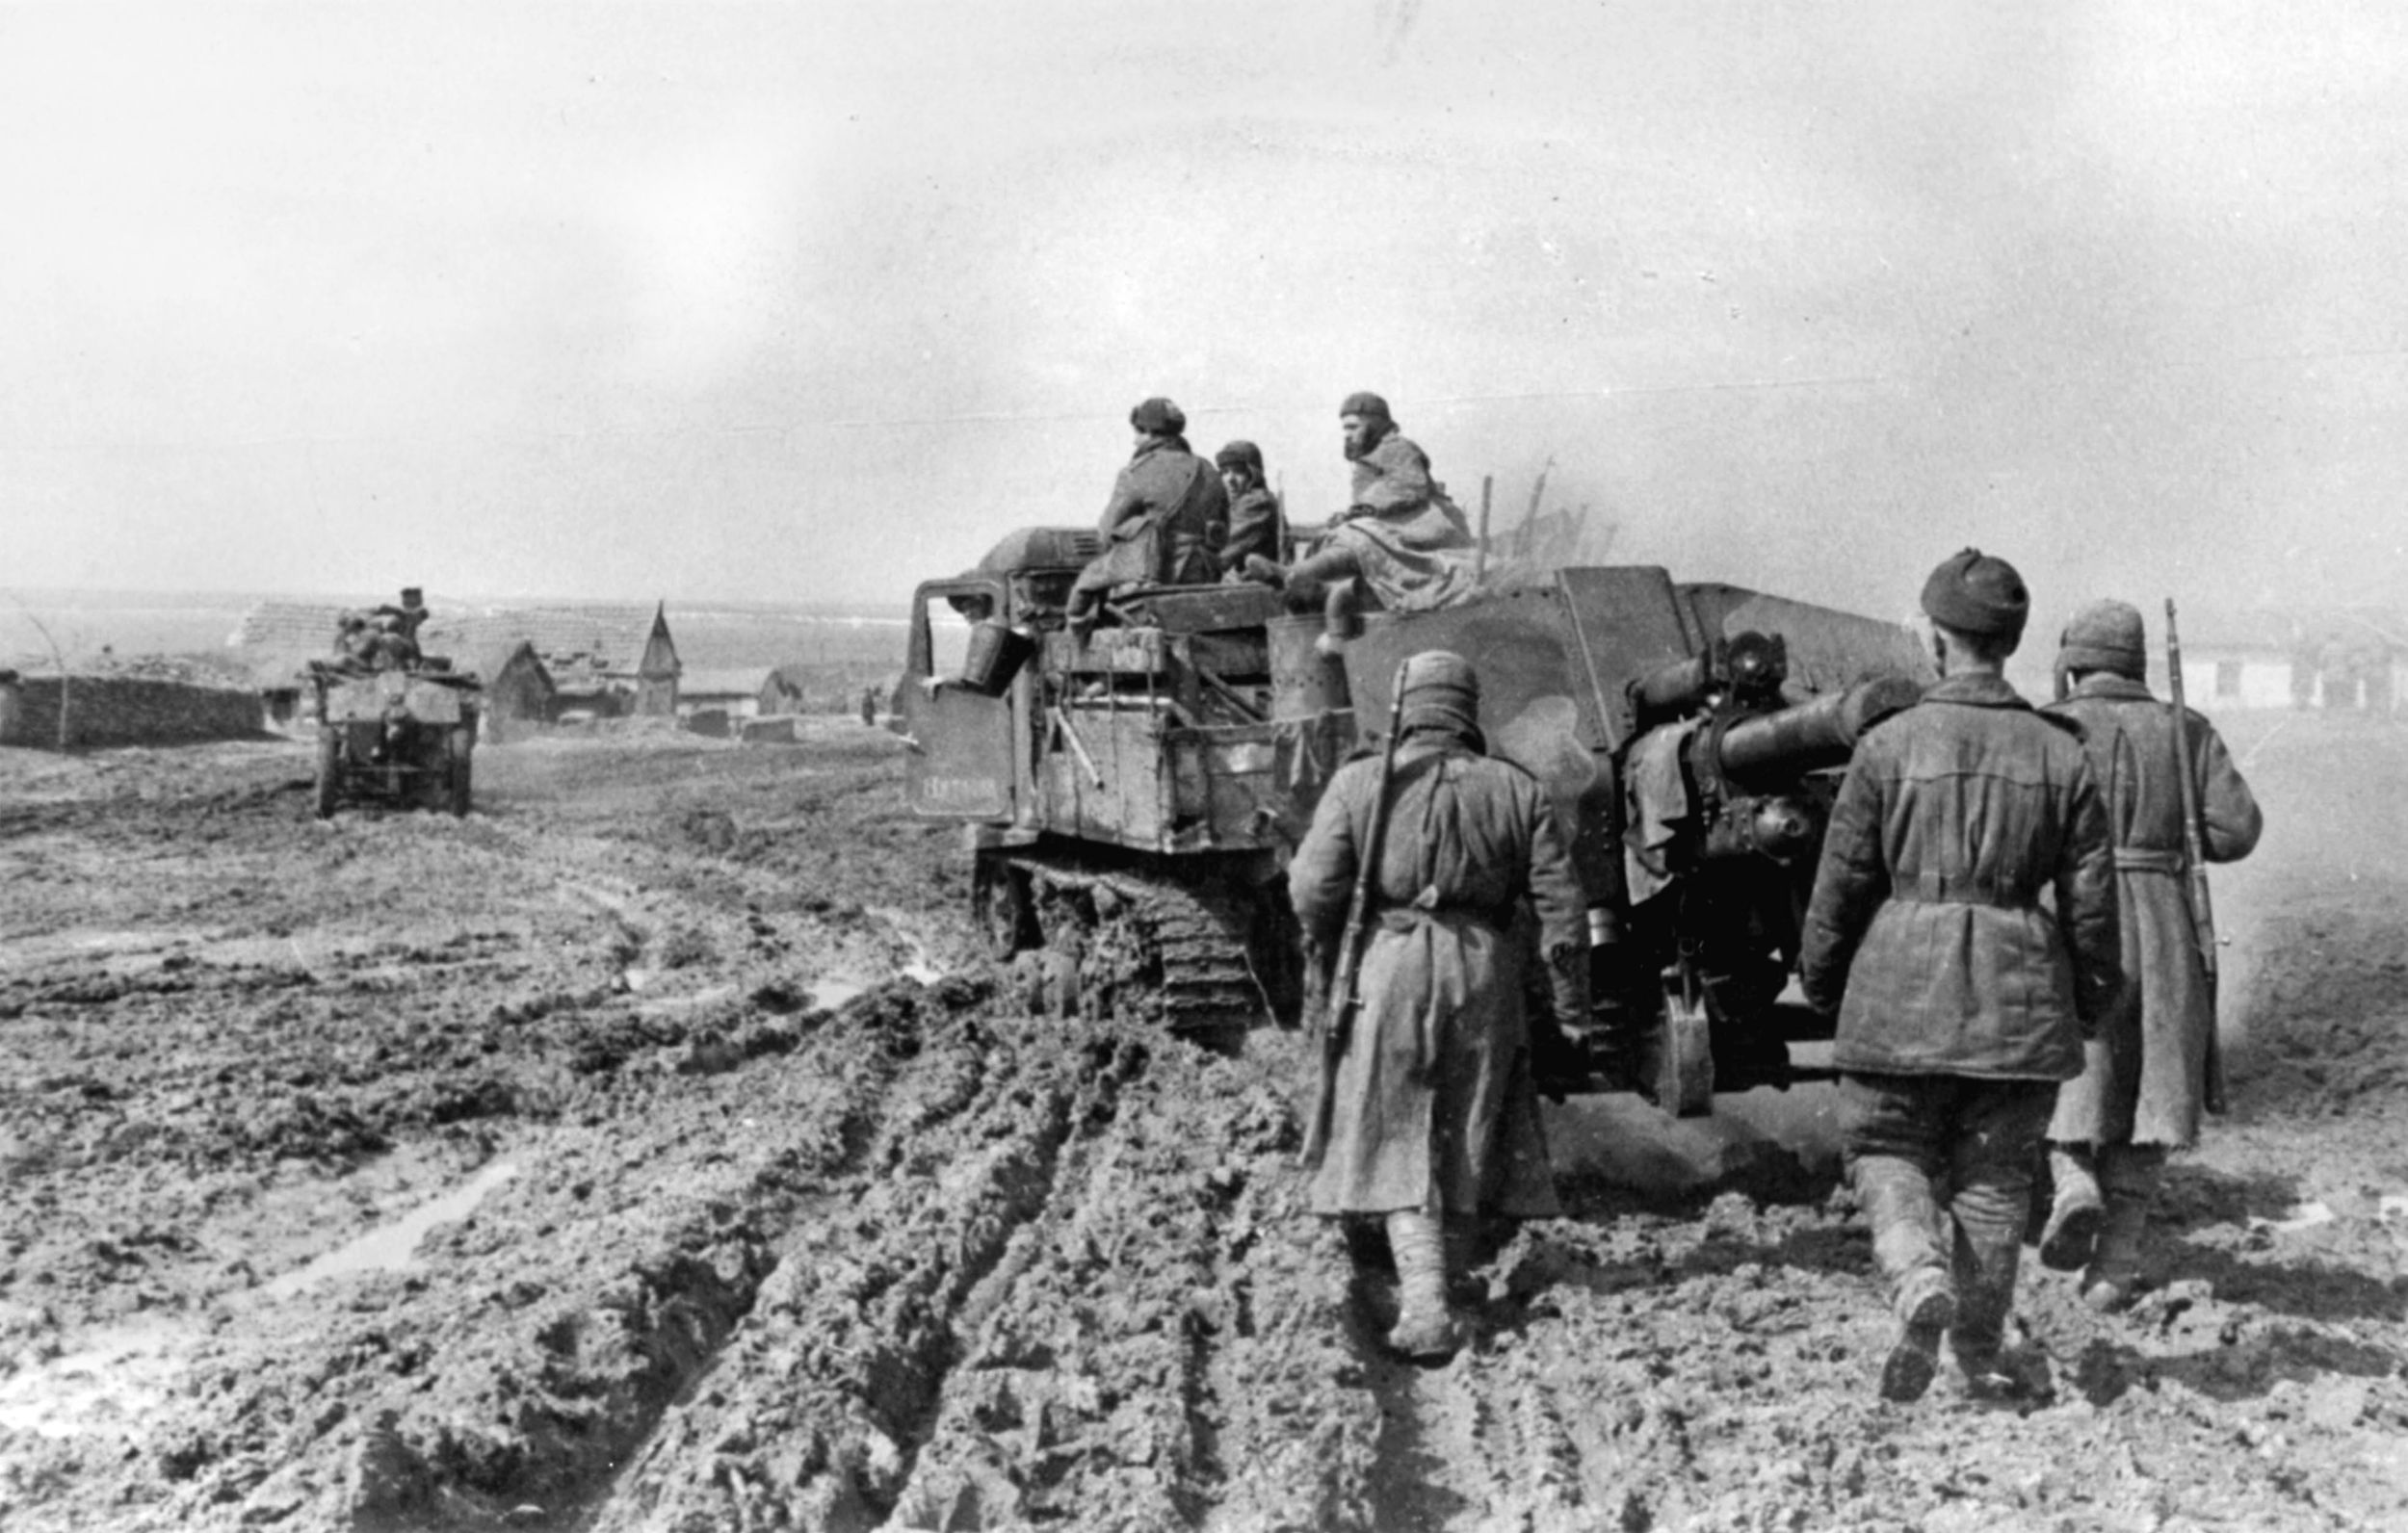 Soviet artillerymen follow the deployment of their weapon as it is towed along a muddy road by a prime mover. Massed Red Army artillery played a key role in numerous victories on the Eastern Front. This photo was taken in April 1944, as spring rains soaked the ground and made the movement of men and machines difficult.